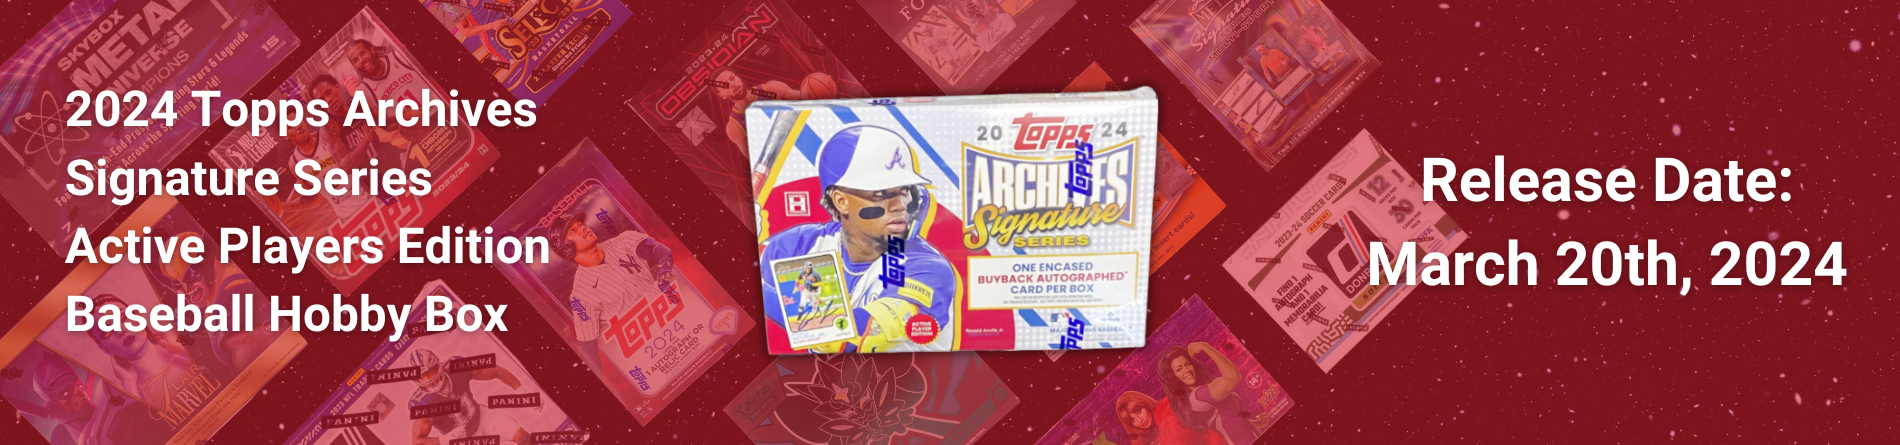 2024 Topps Archives Signature Series Active Players Edition Baseball Hobby